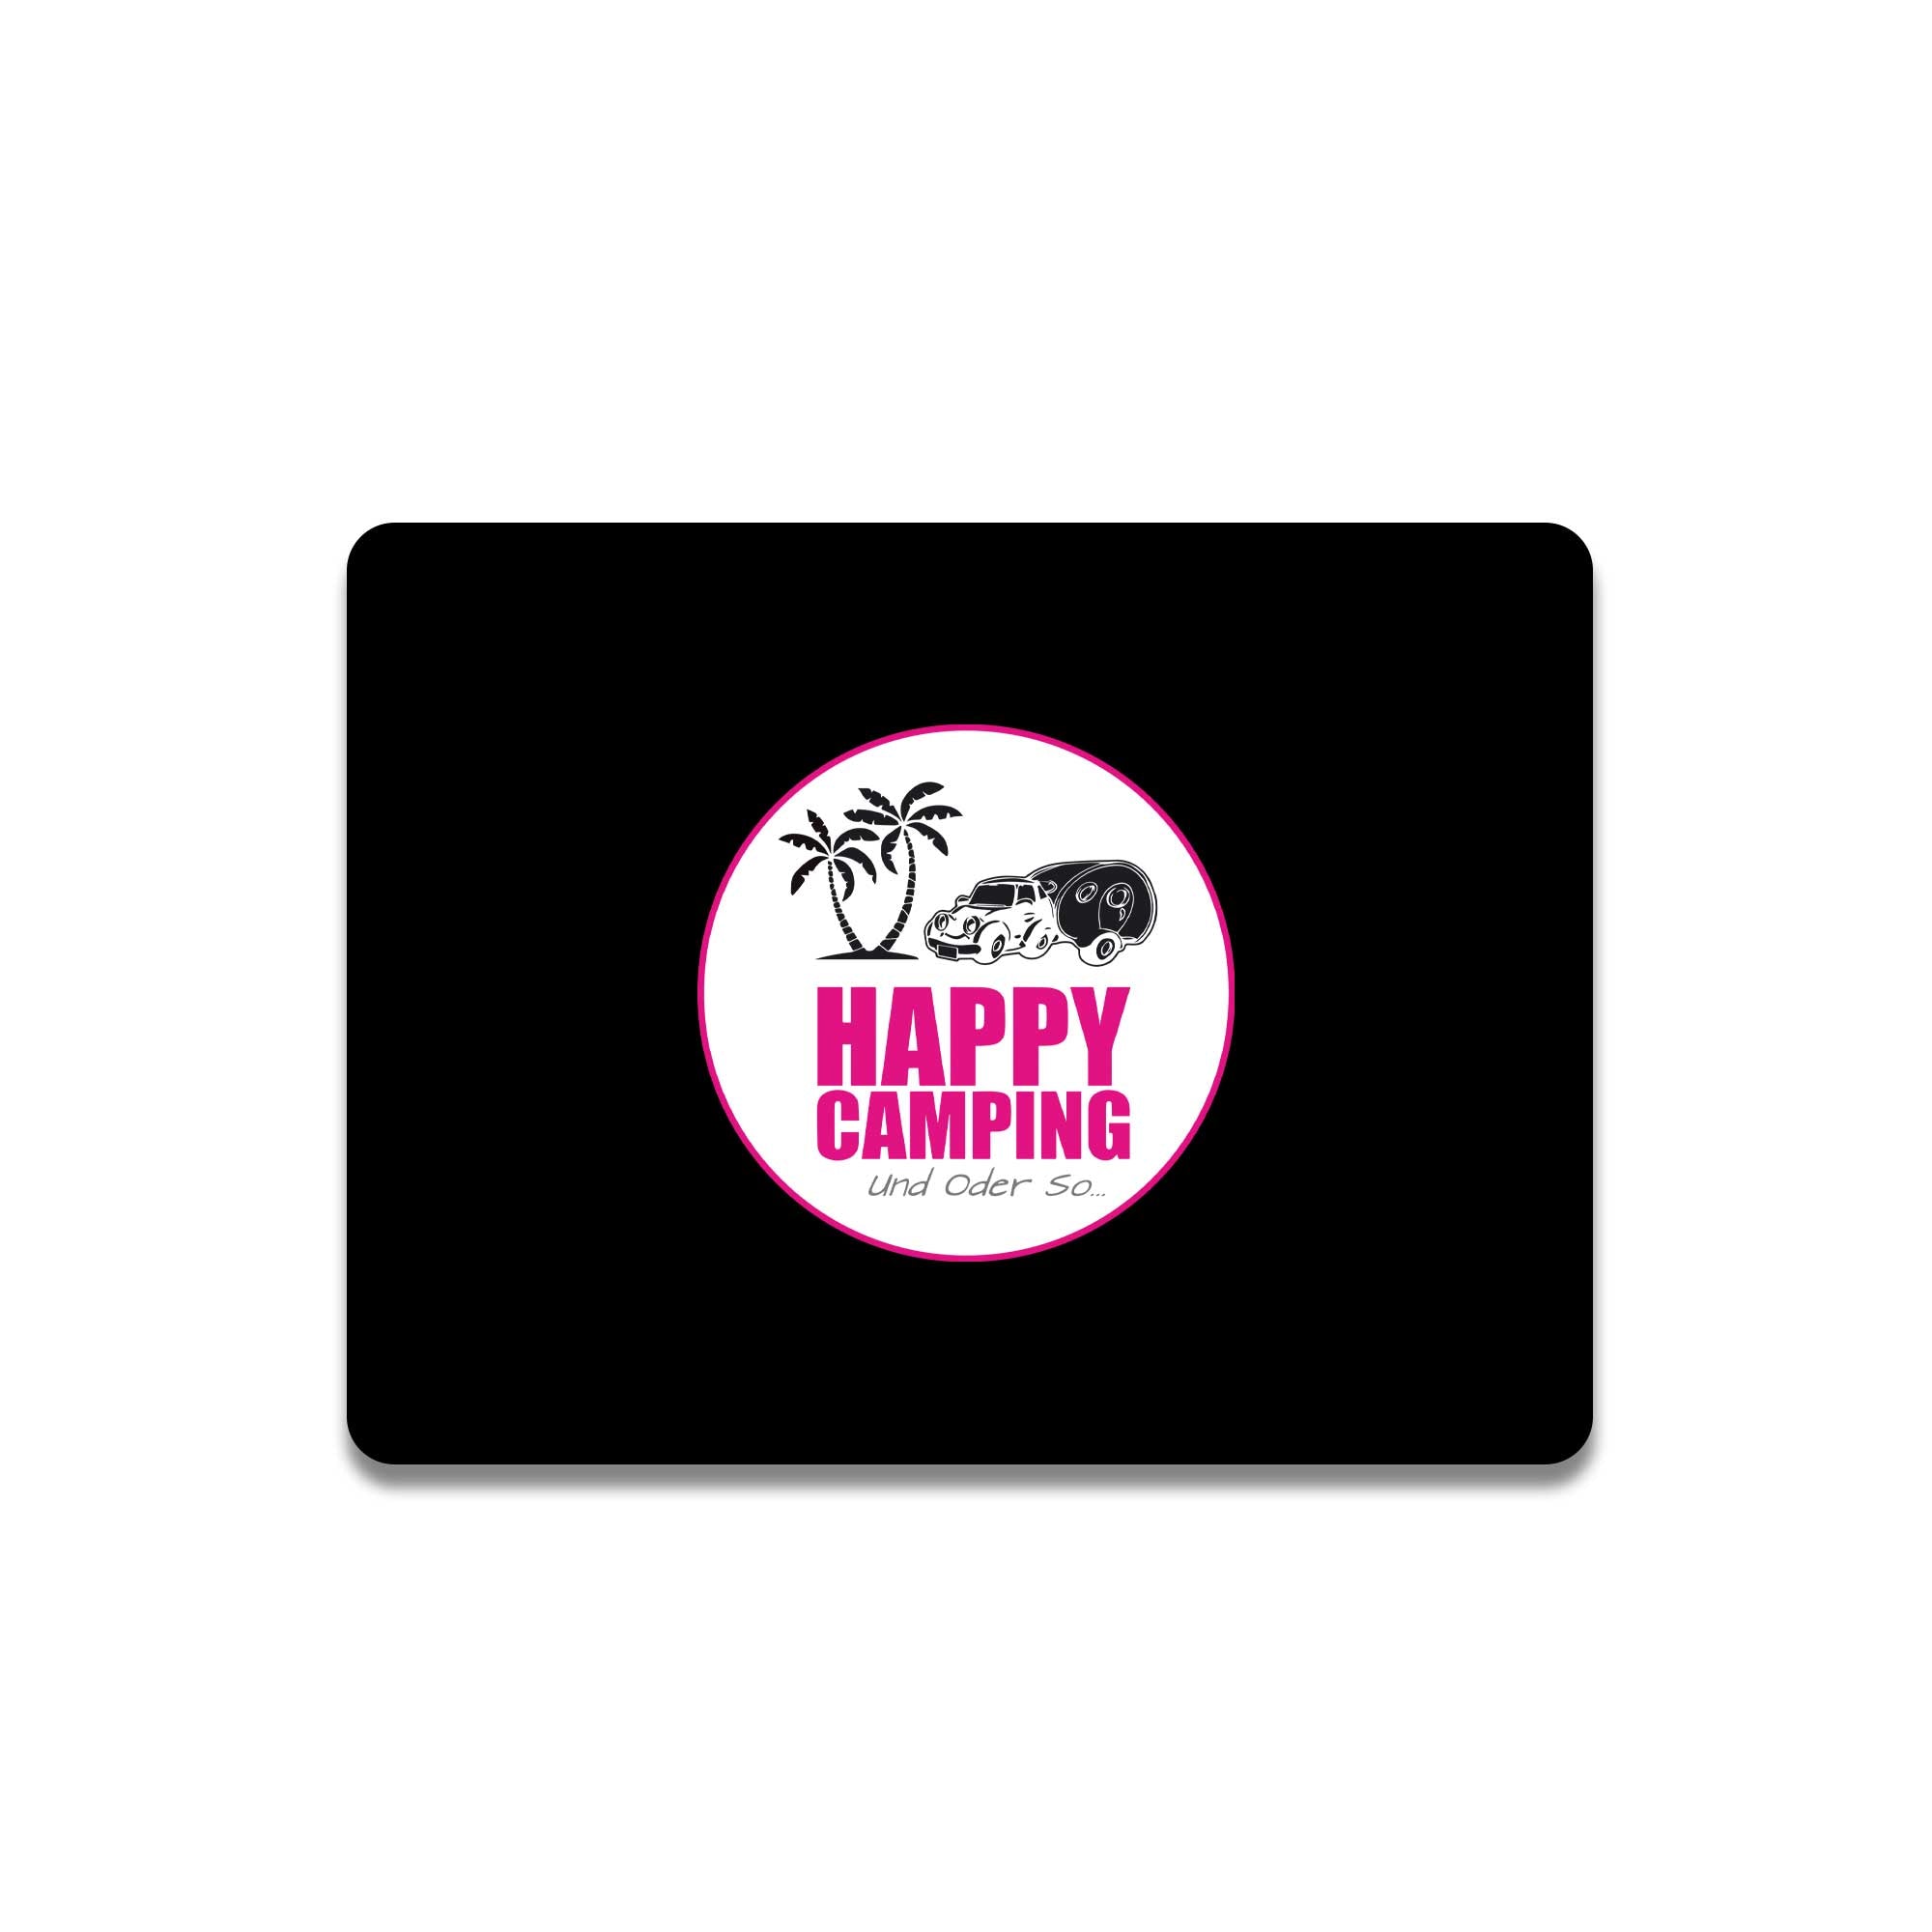 HAPPY CAMPING mouse pad